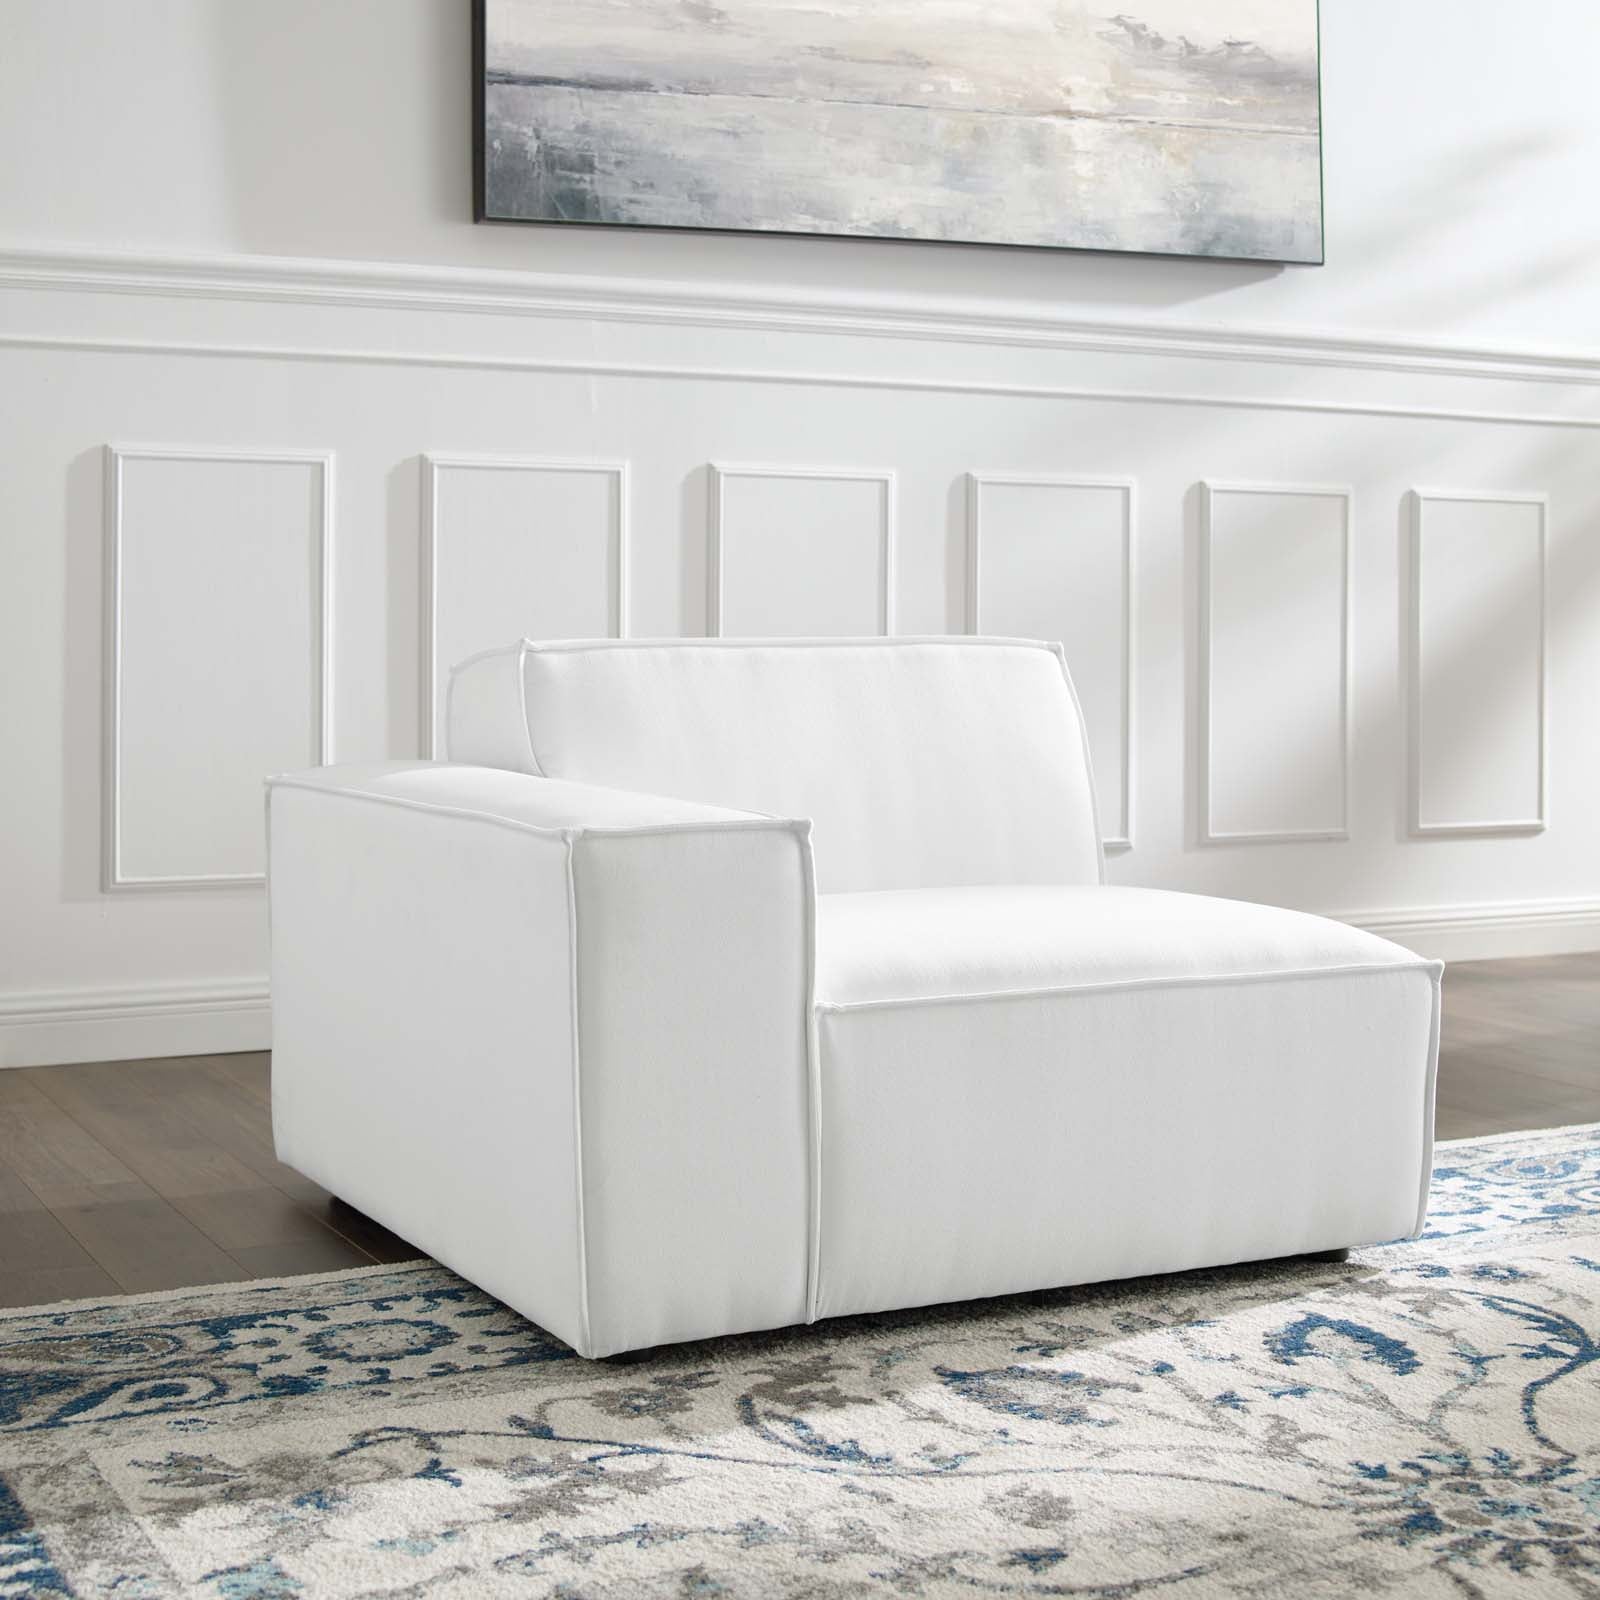 Restore Right-Arm Sectional Sofa Chair - East Shore Modern Home Furnishings